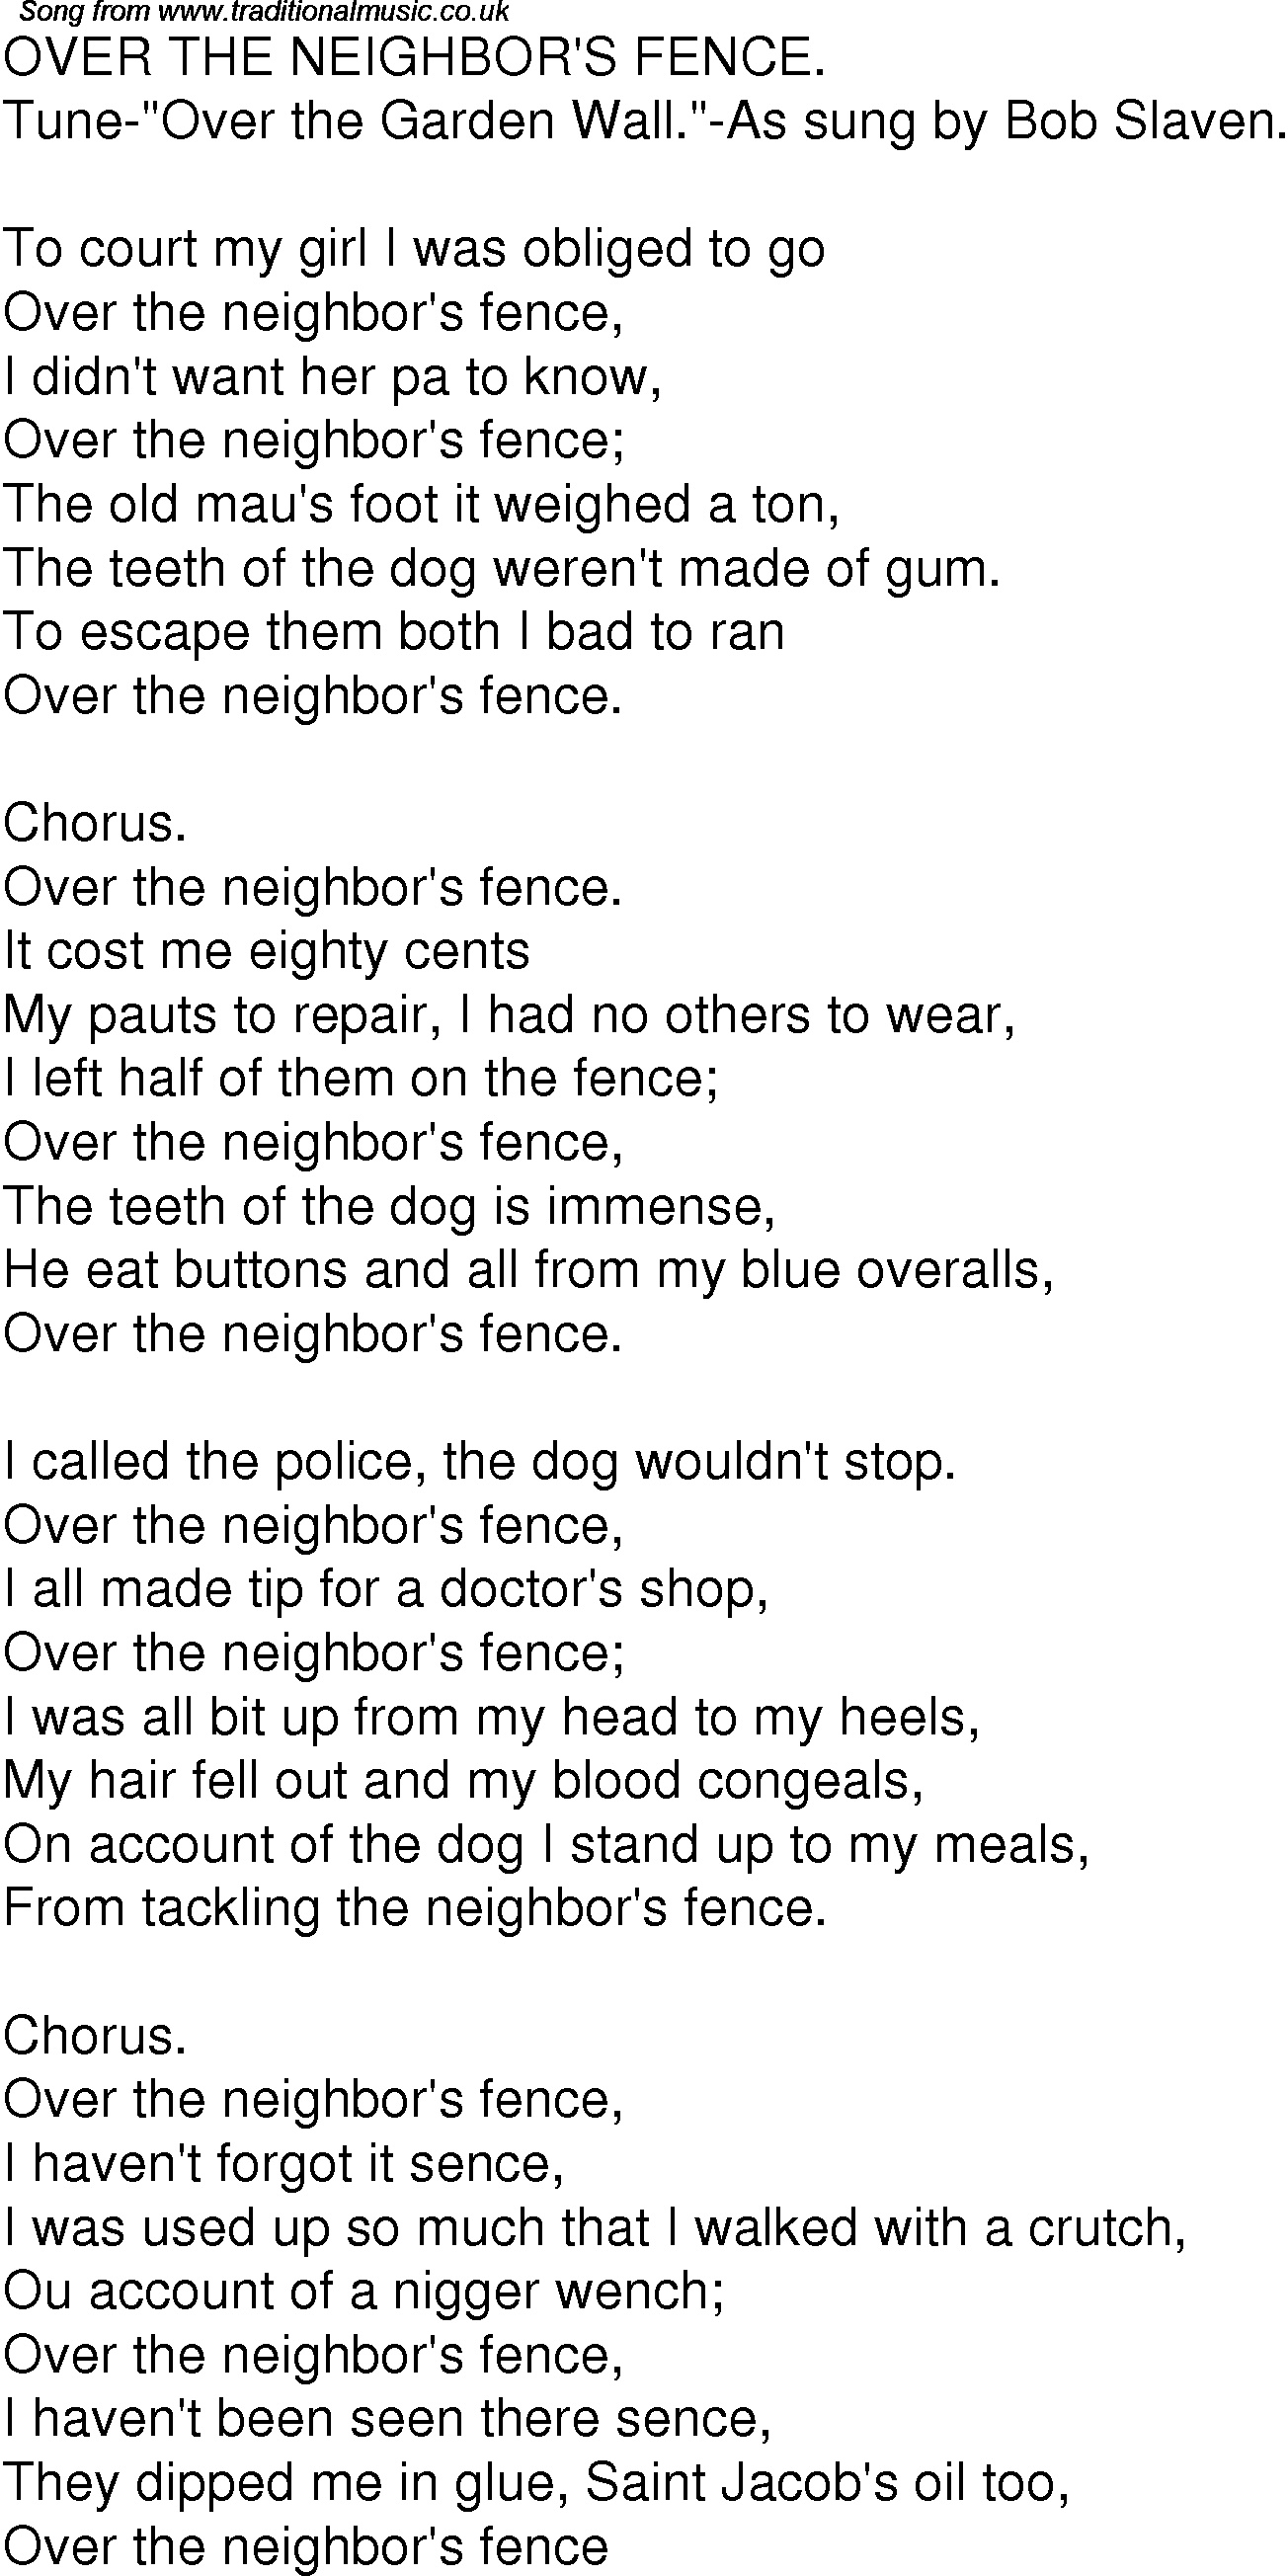 Old Time Song Lyrics For 05 Over The Neighbors Fence